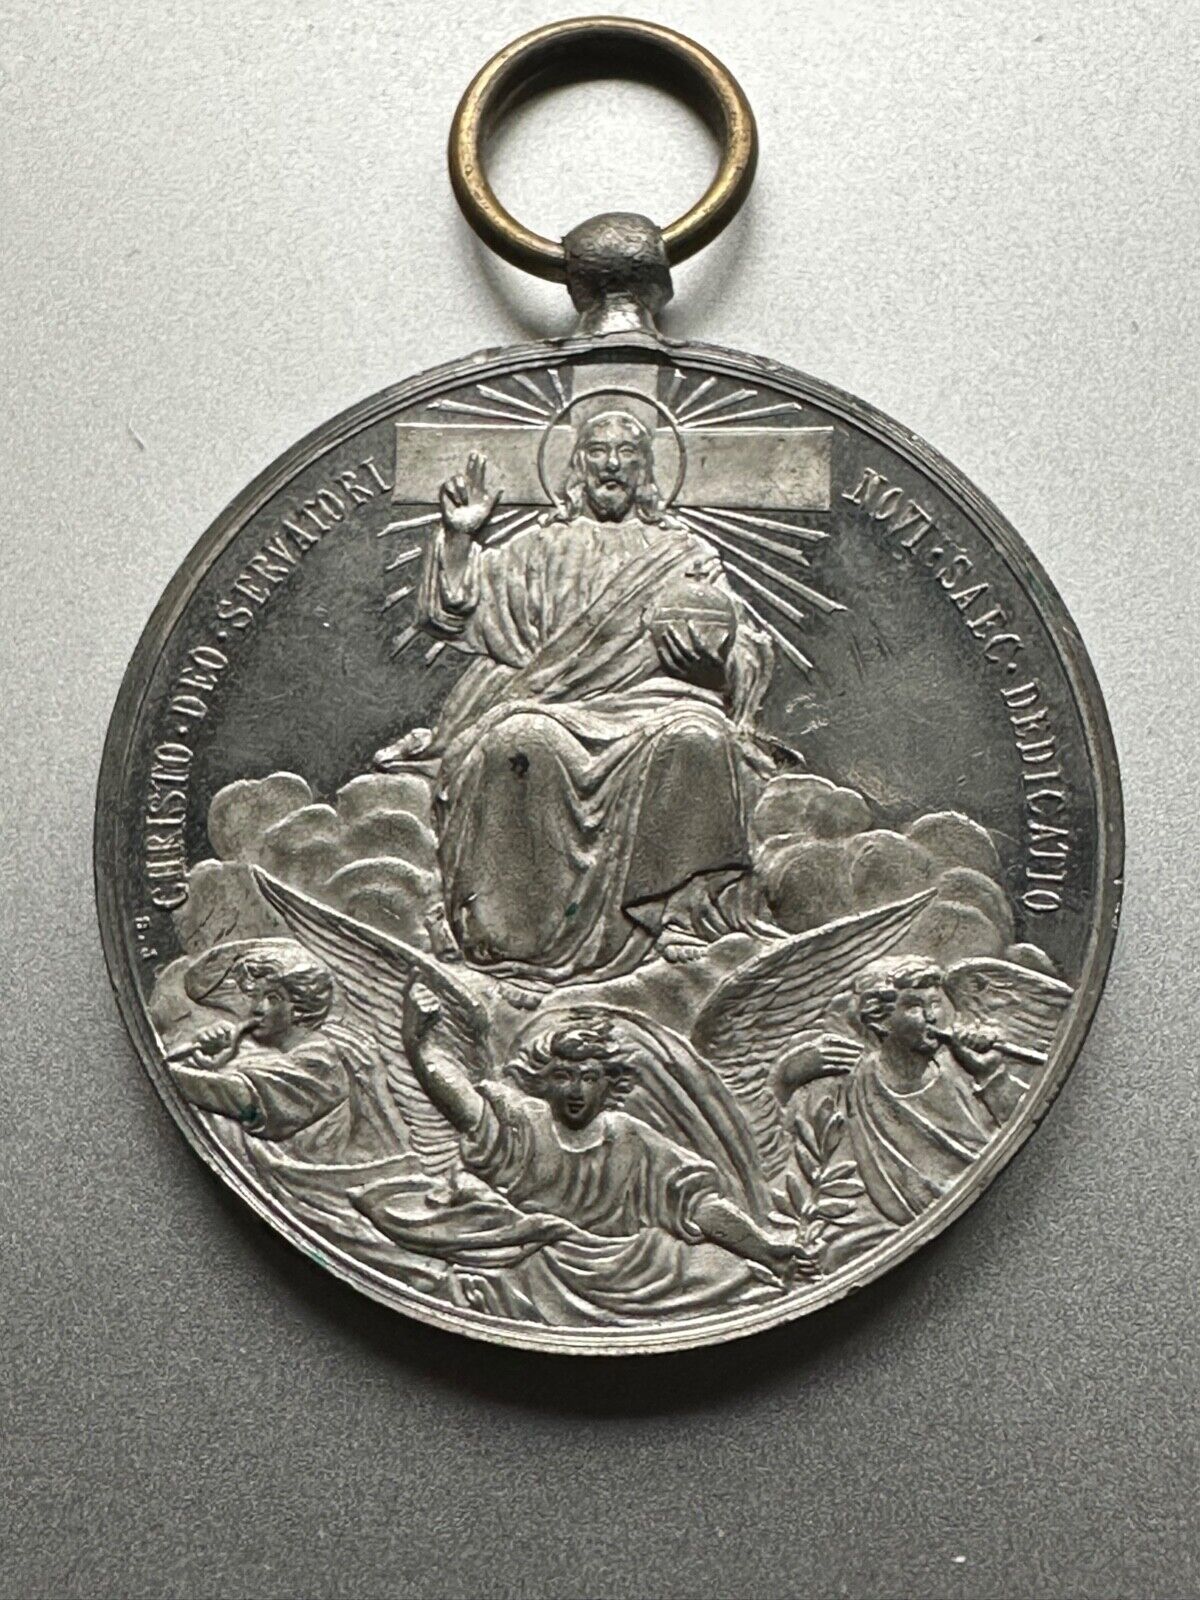 French Silver Religious Medal dated 1800 MDCCCC -Christo Deo Servatory